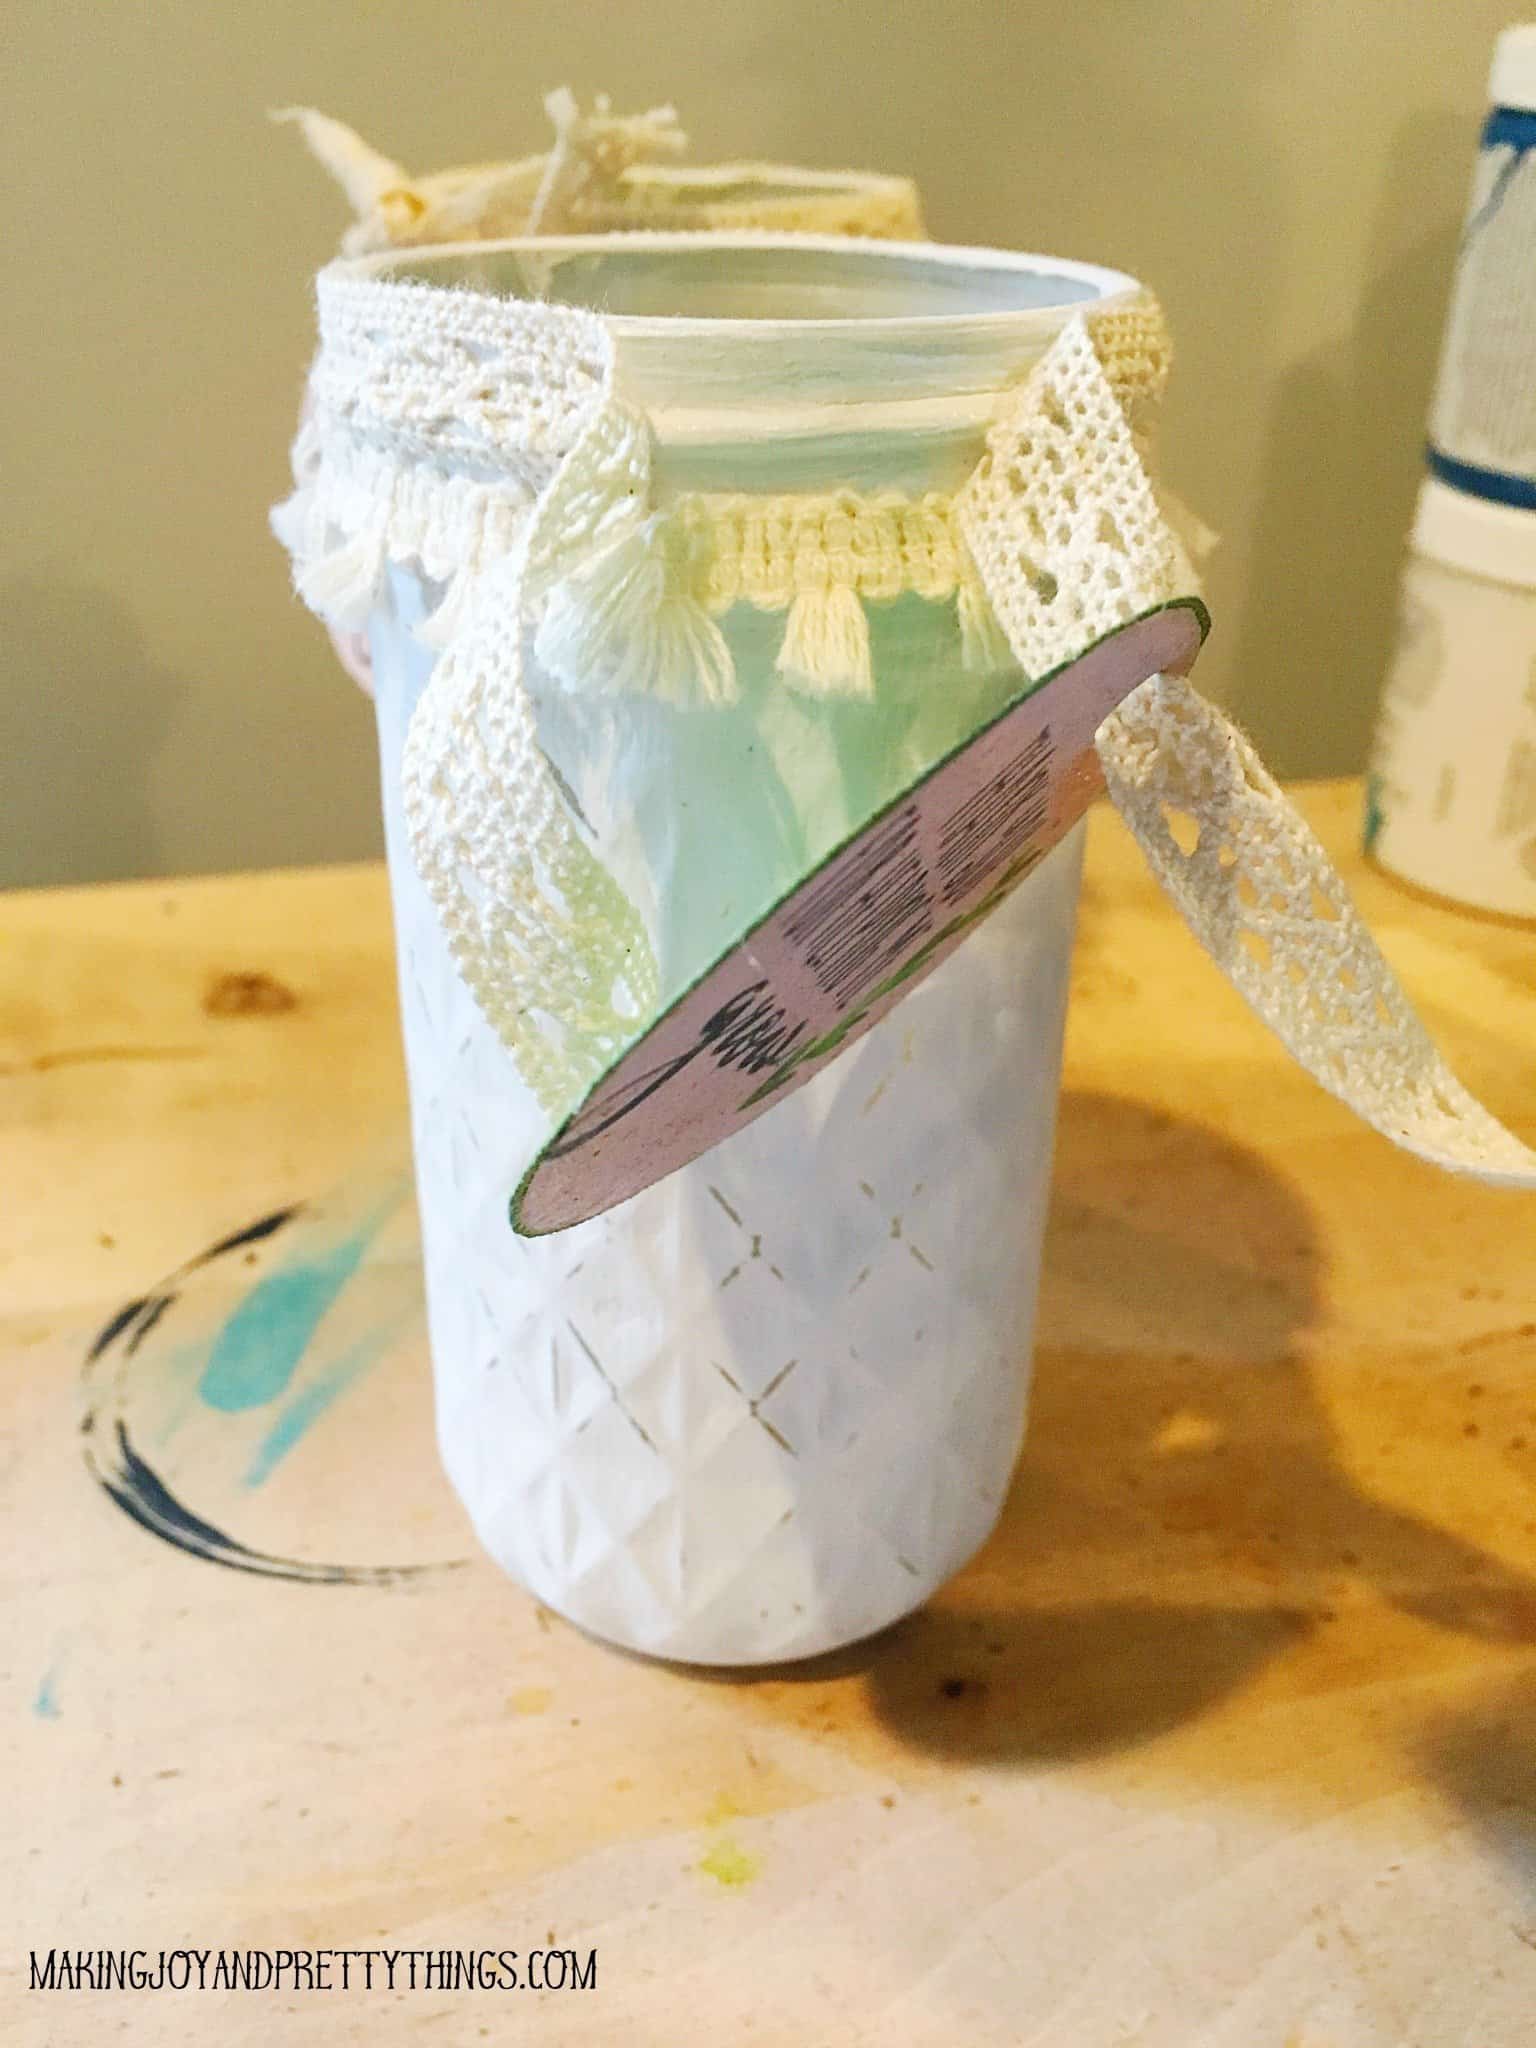 Threading the Thanks for helping me grow printable with ribbon on the distressed jar